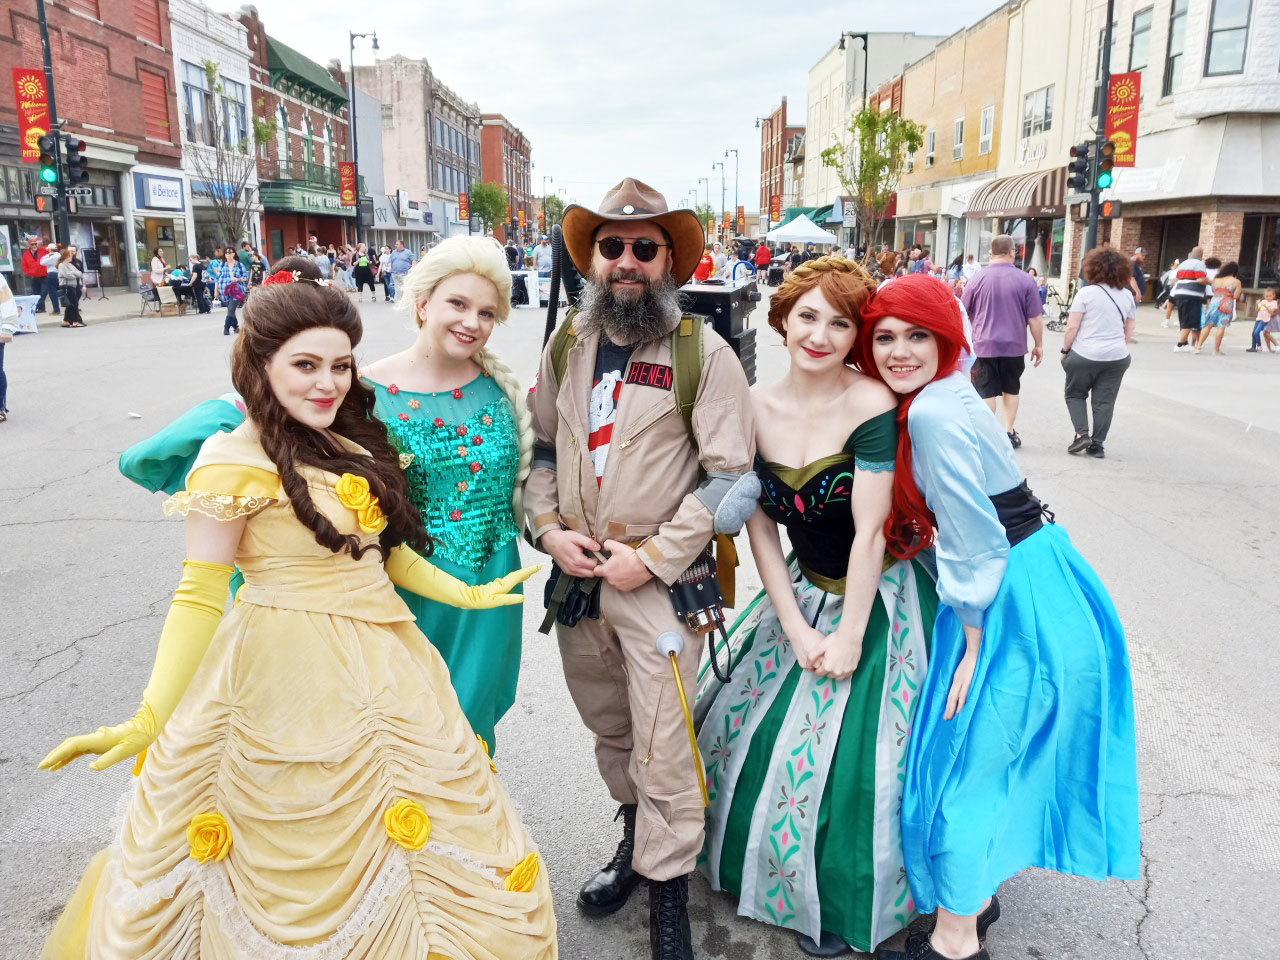 Some attendees dressed up for the Pittsburg ArtWalk, including Michael Fienen, center, in full Ghostbusters regalia, as well as several local princesses.